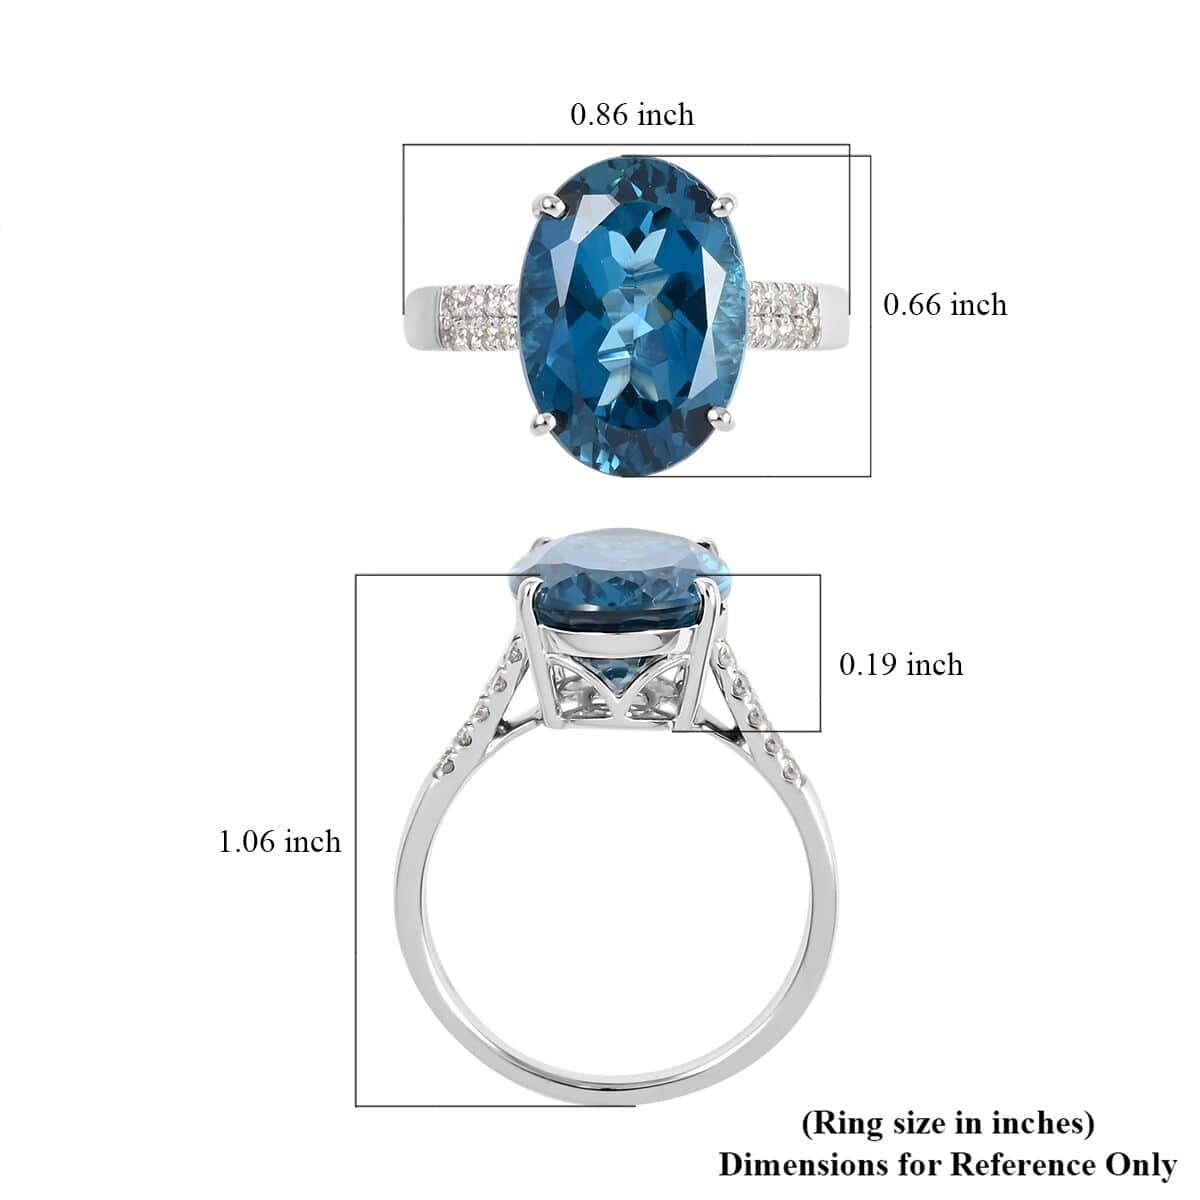 Luxoro AAA London Blue Topaz Ring, Certified & Appraised Blue Topaz Ring, Diamond Accent Ring, 10K White Gold, Wedding Rings 7.25 ctw (Size 6) image number 5